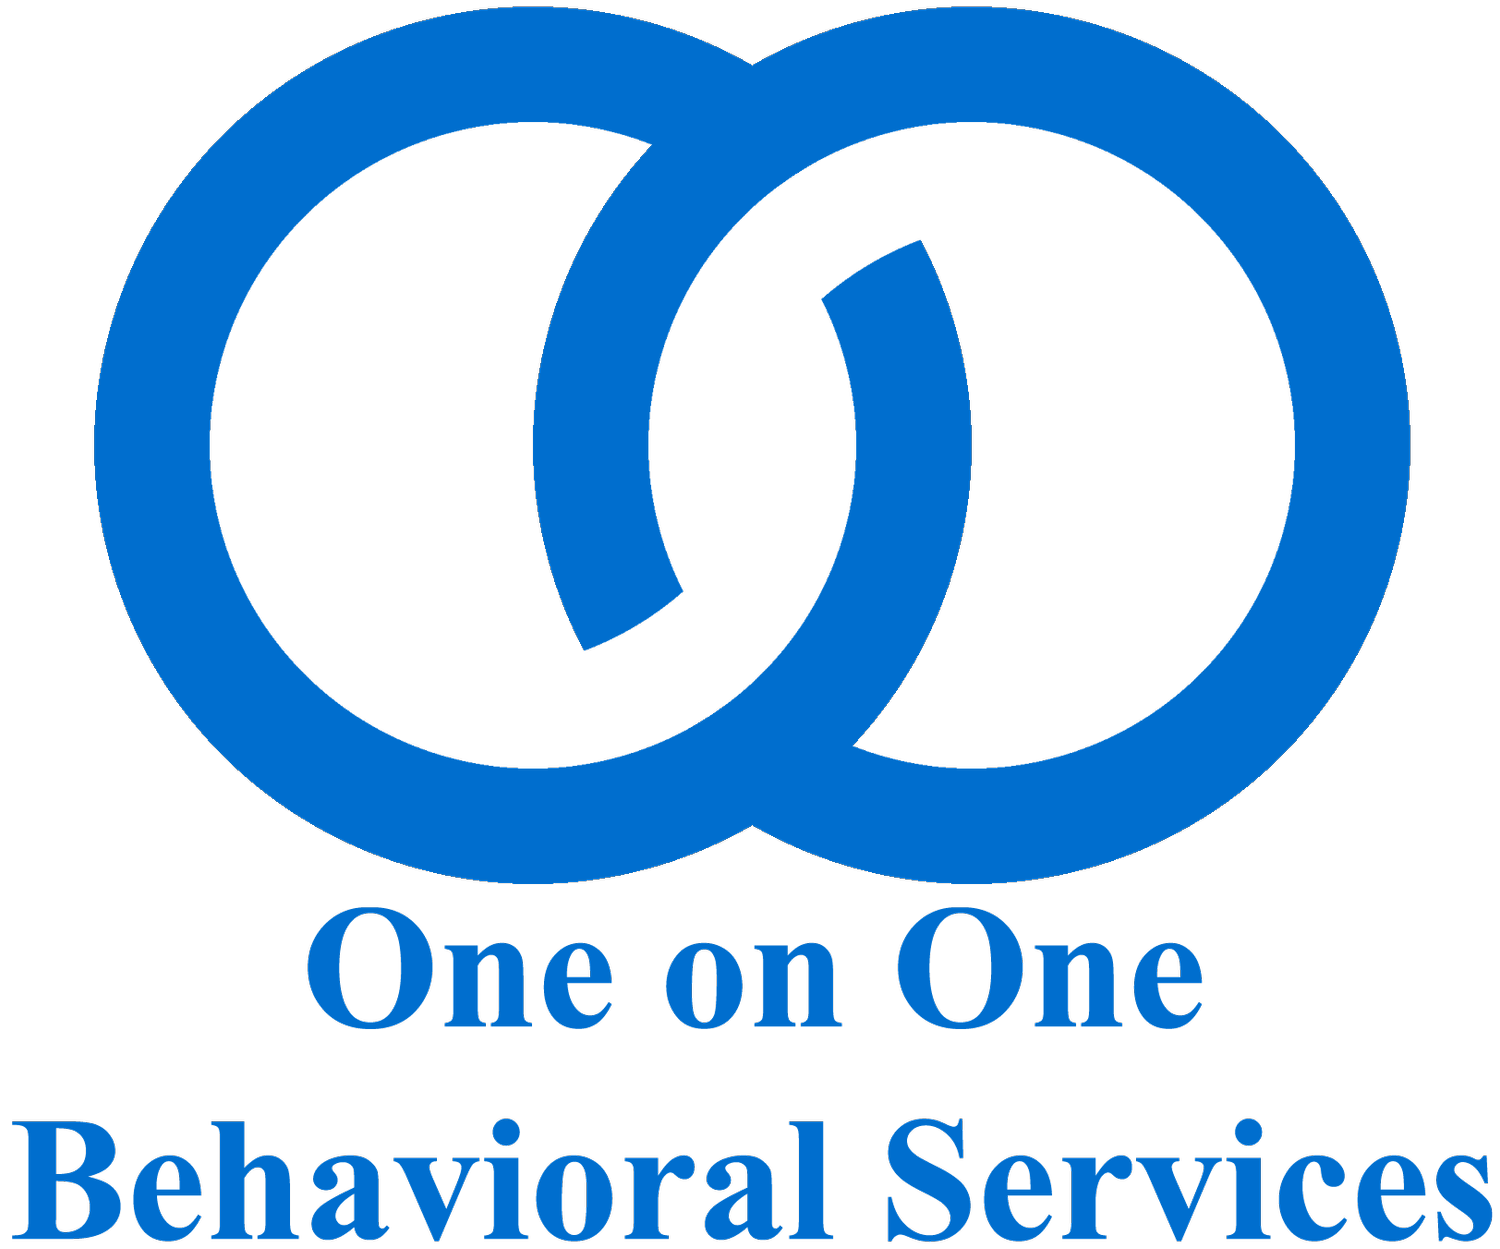 One on One Behavioral Services